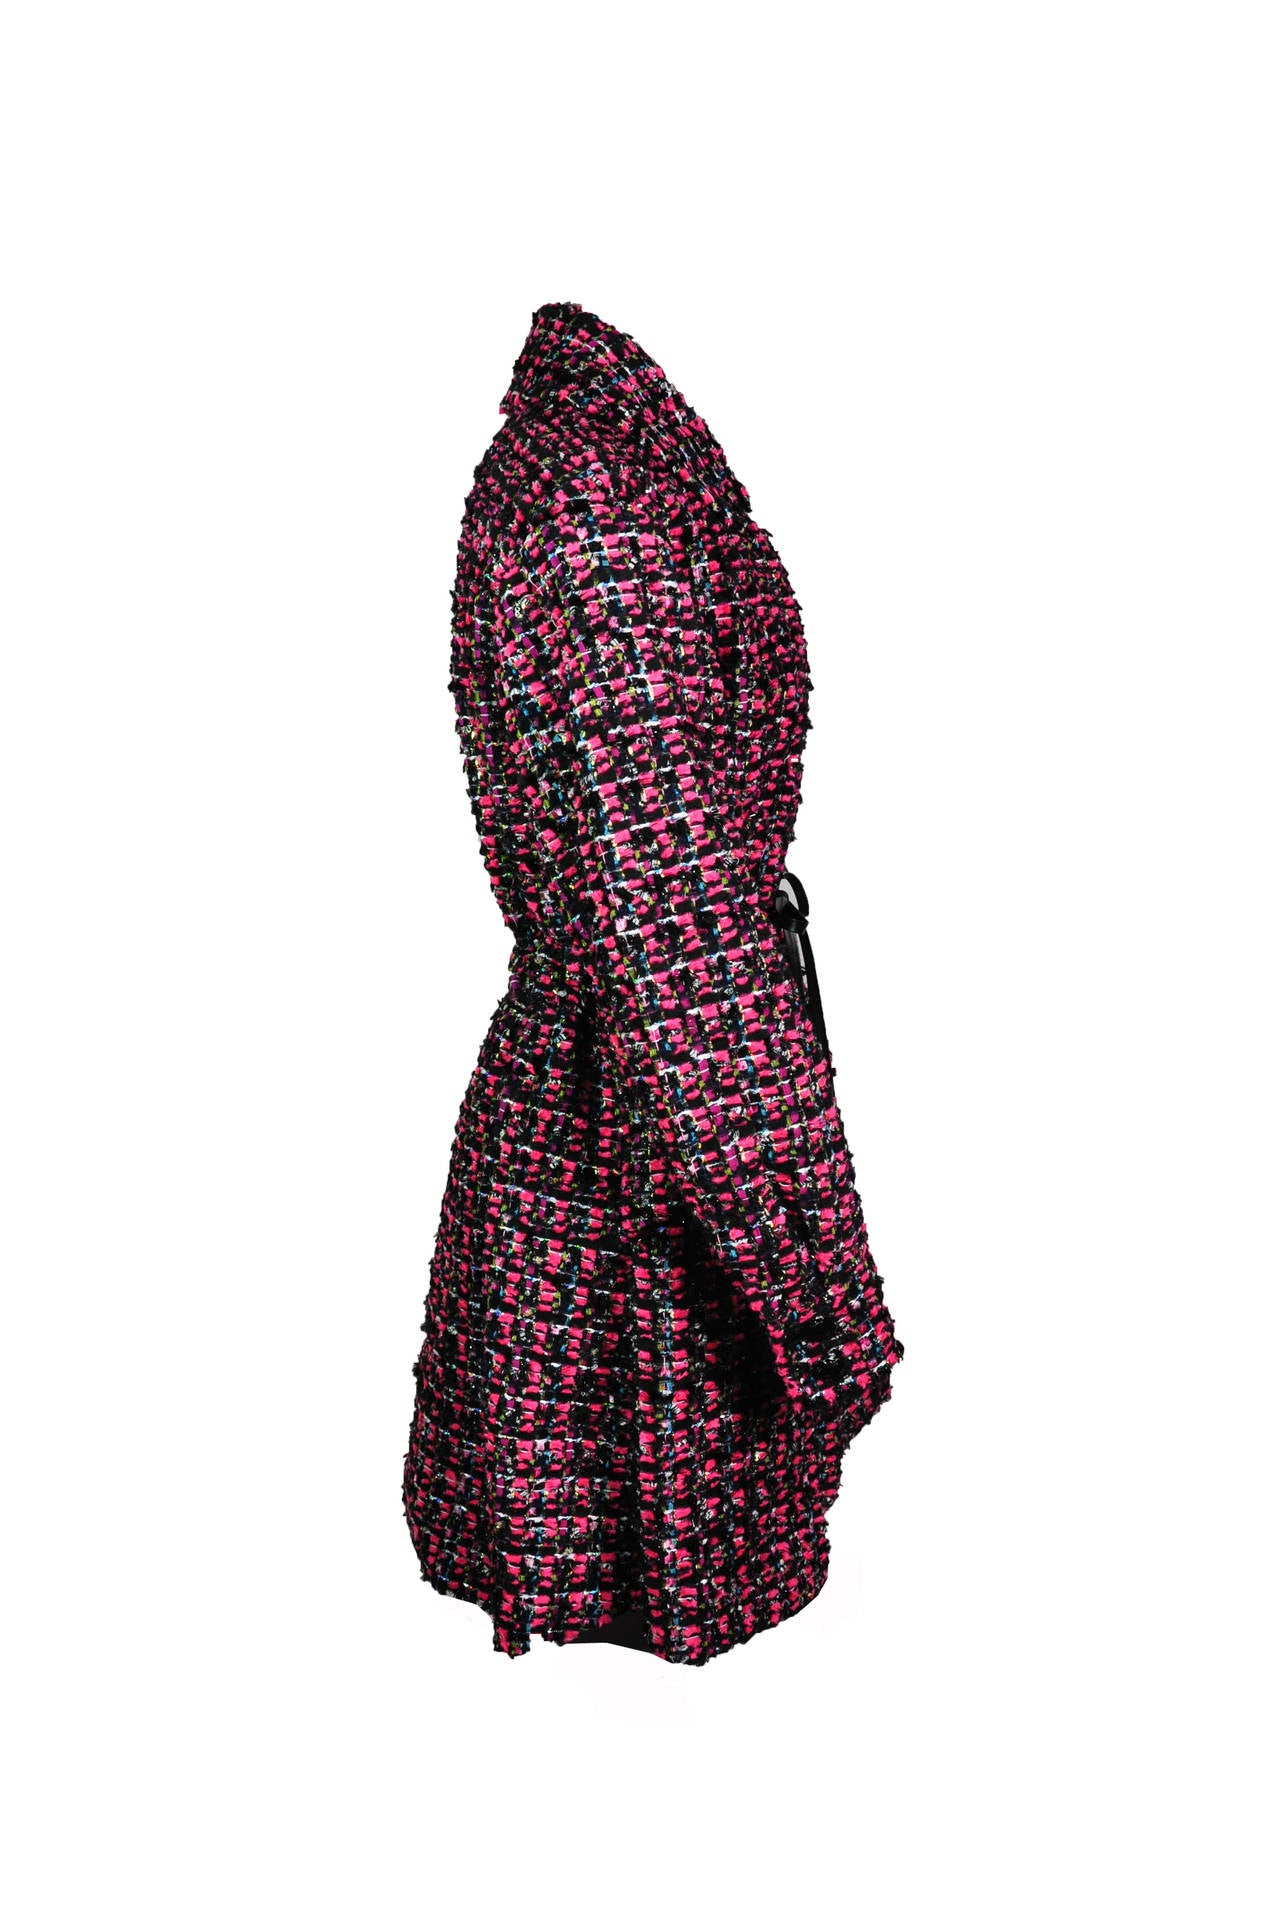 This knee length Chanel lesage tweed coat dress is in black/rose/turquoise colors.  The leather drawstring at waist together with the full and pleated skirt define well to flatter every figure. Panels in front and at back add structure and